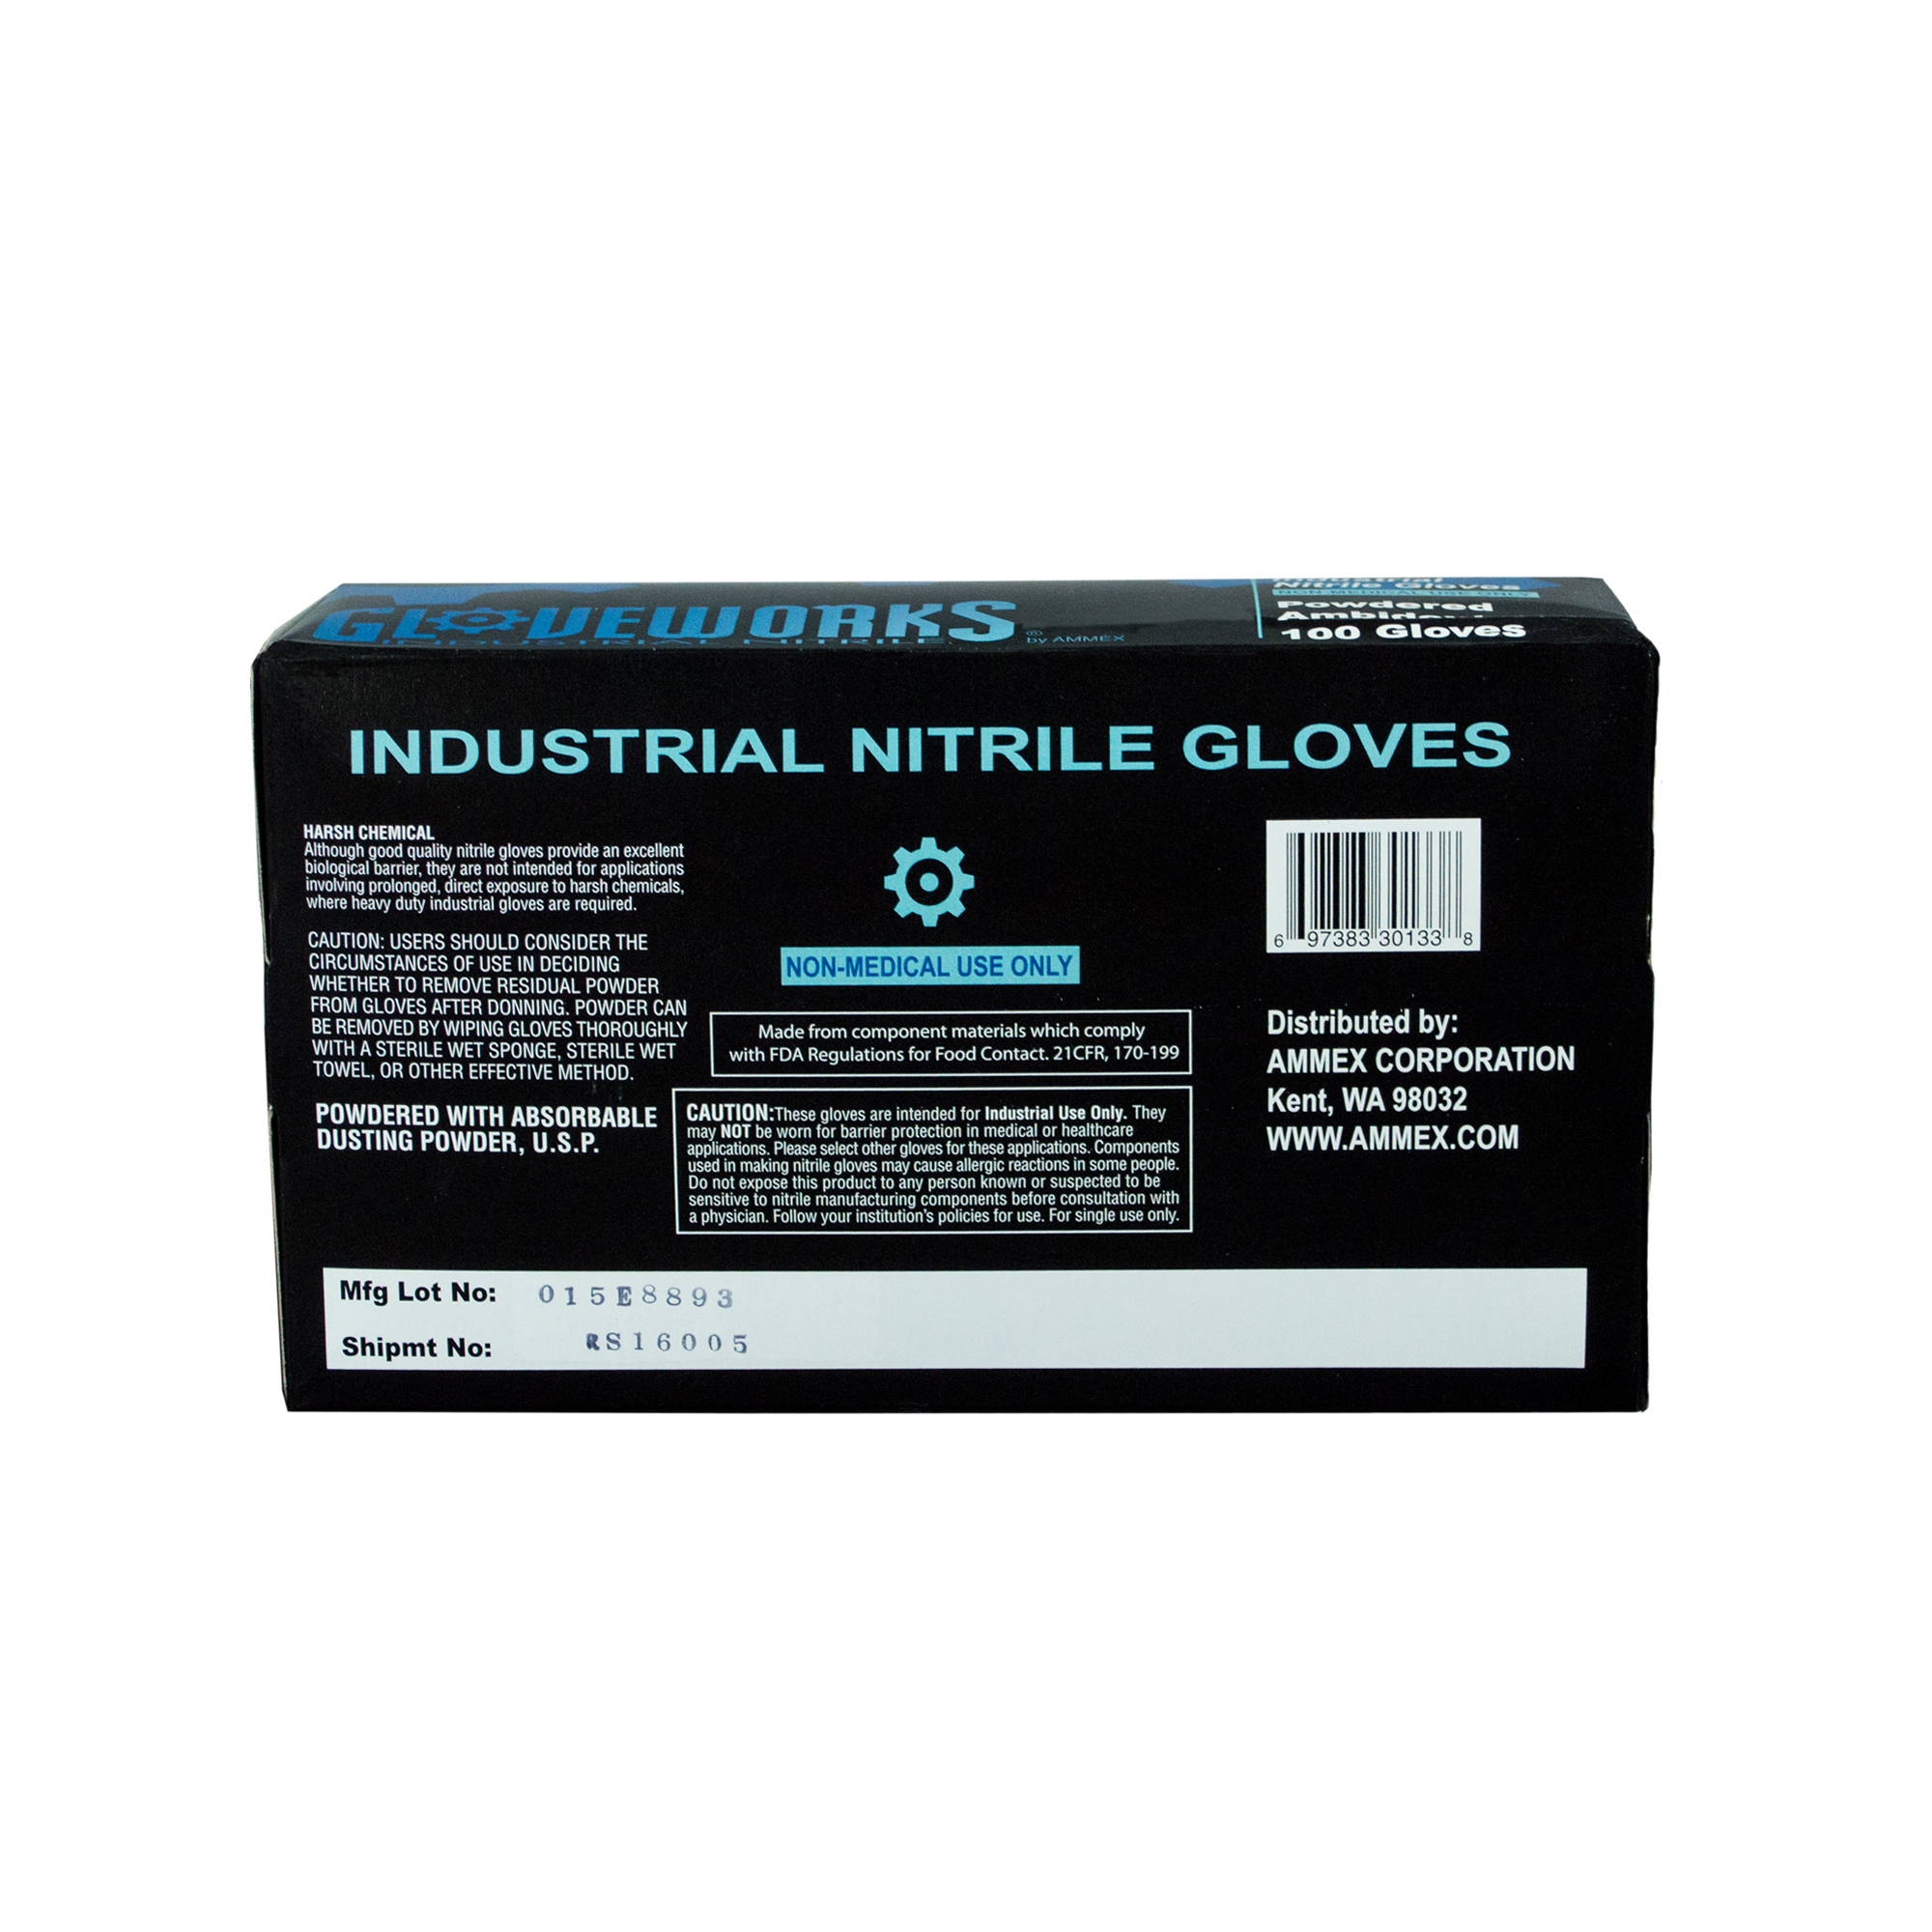 Picture of Glove, XXL, Nitrile,  GloveWorks, Powdered, 100 EA/BX